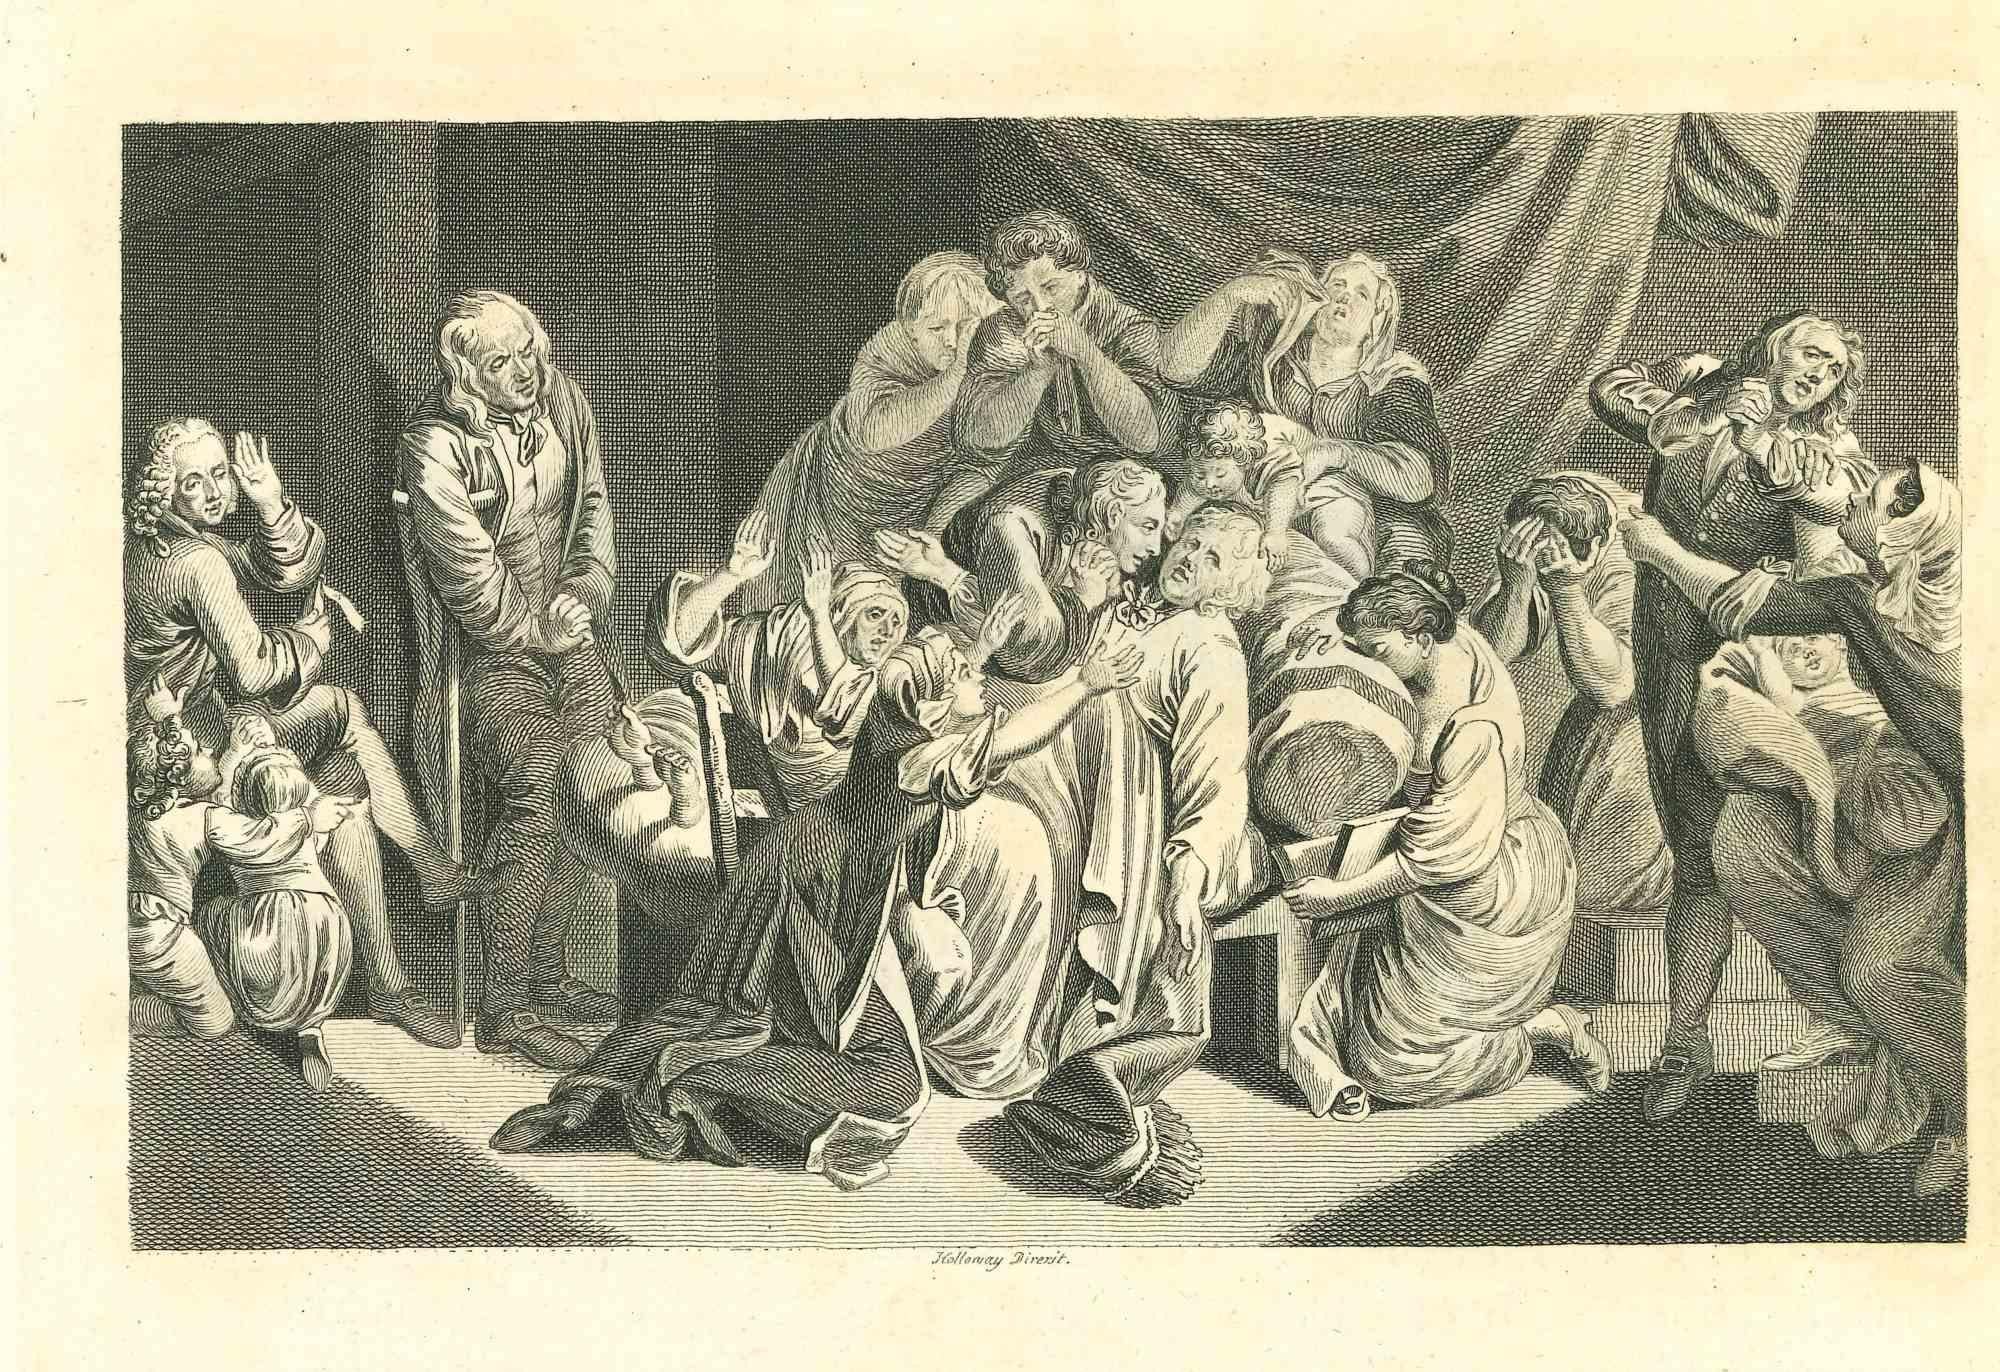 Reactions to Death is an original artwork realized by Thomas Holloway for Johann Caspar Lavater's  "Essays on Physiognomy, Designed to promote the Knowledge and the Love of Mankind", London, Bensley, 1810. 

This artwork portrays a historical scene.